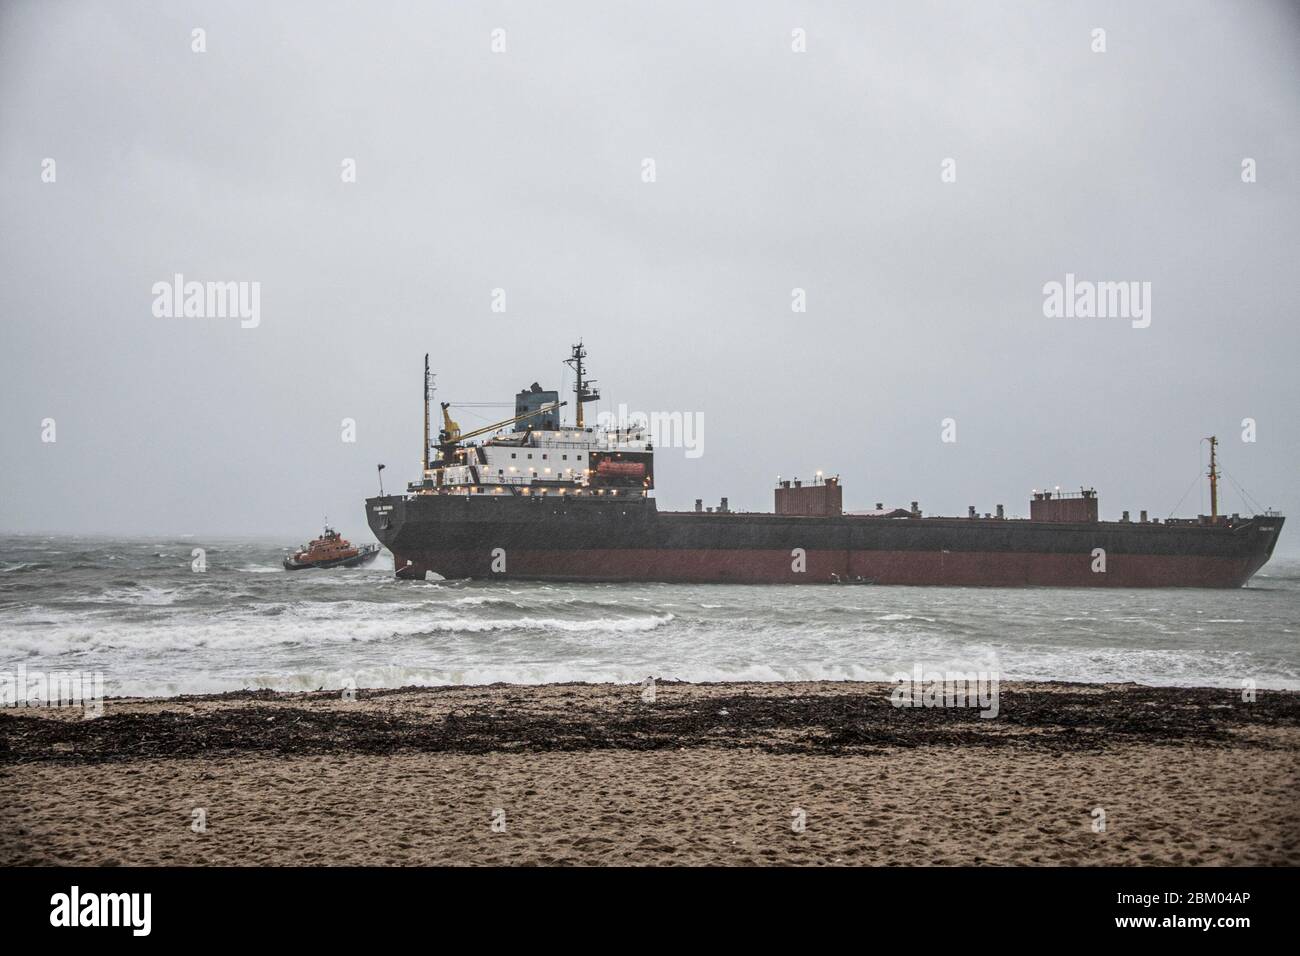 Falmouth Cornwall ,The ill-fated Russian bulk carrier Kuzma Minin, since renamed Energy Annabelle, is leaving Falmouth port this week Russian Cargo ship runs aground on Gyllyngvase beach Falmouth Cornwall, UK. 18th Dec, 2018. with the falmouth lifeboat, The ill-fated Russian bulk carrier Kuzma Minin, since renamed Energy Annabelle, is leaving Falmouth port this week for a shipbreaker's in Sea Diamond. It has spent 15 months moored to the Cross Roads casualty reception buoy. On December 18, 2018, the bulk carrier dragged anchor in gale force winds and went ashore west of Gyllyngvase Stock Photo